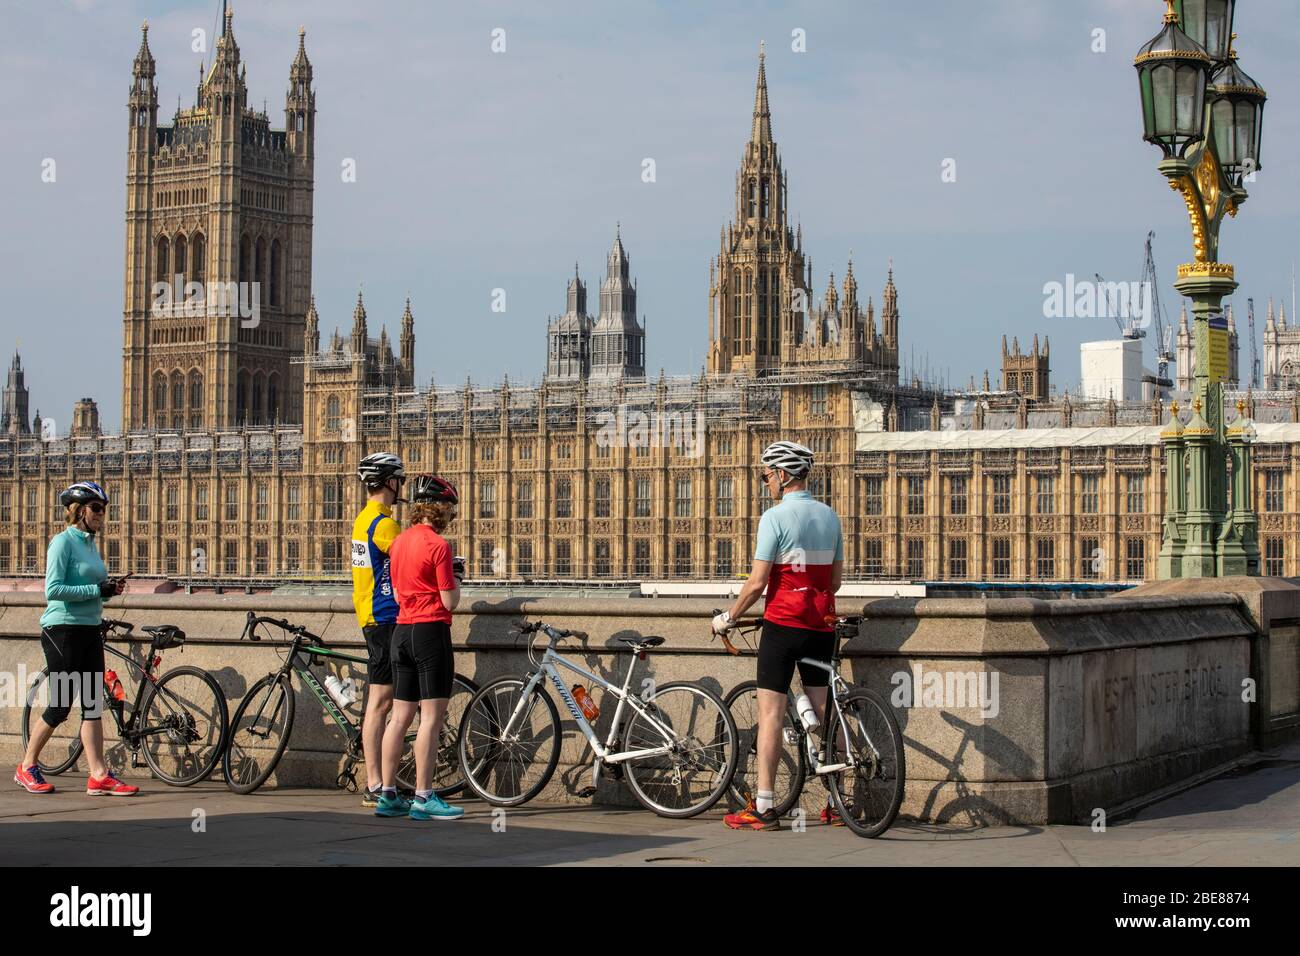 Cyclists take in the view over Houses of Parliament during the coronavirus COVID-19 lockdown which advises people to stay at home unless essential. Stock Photo